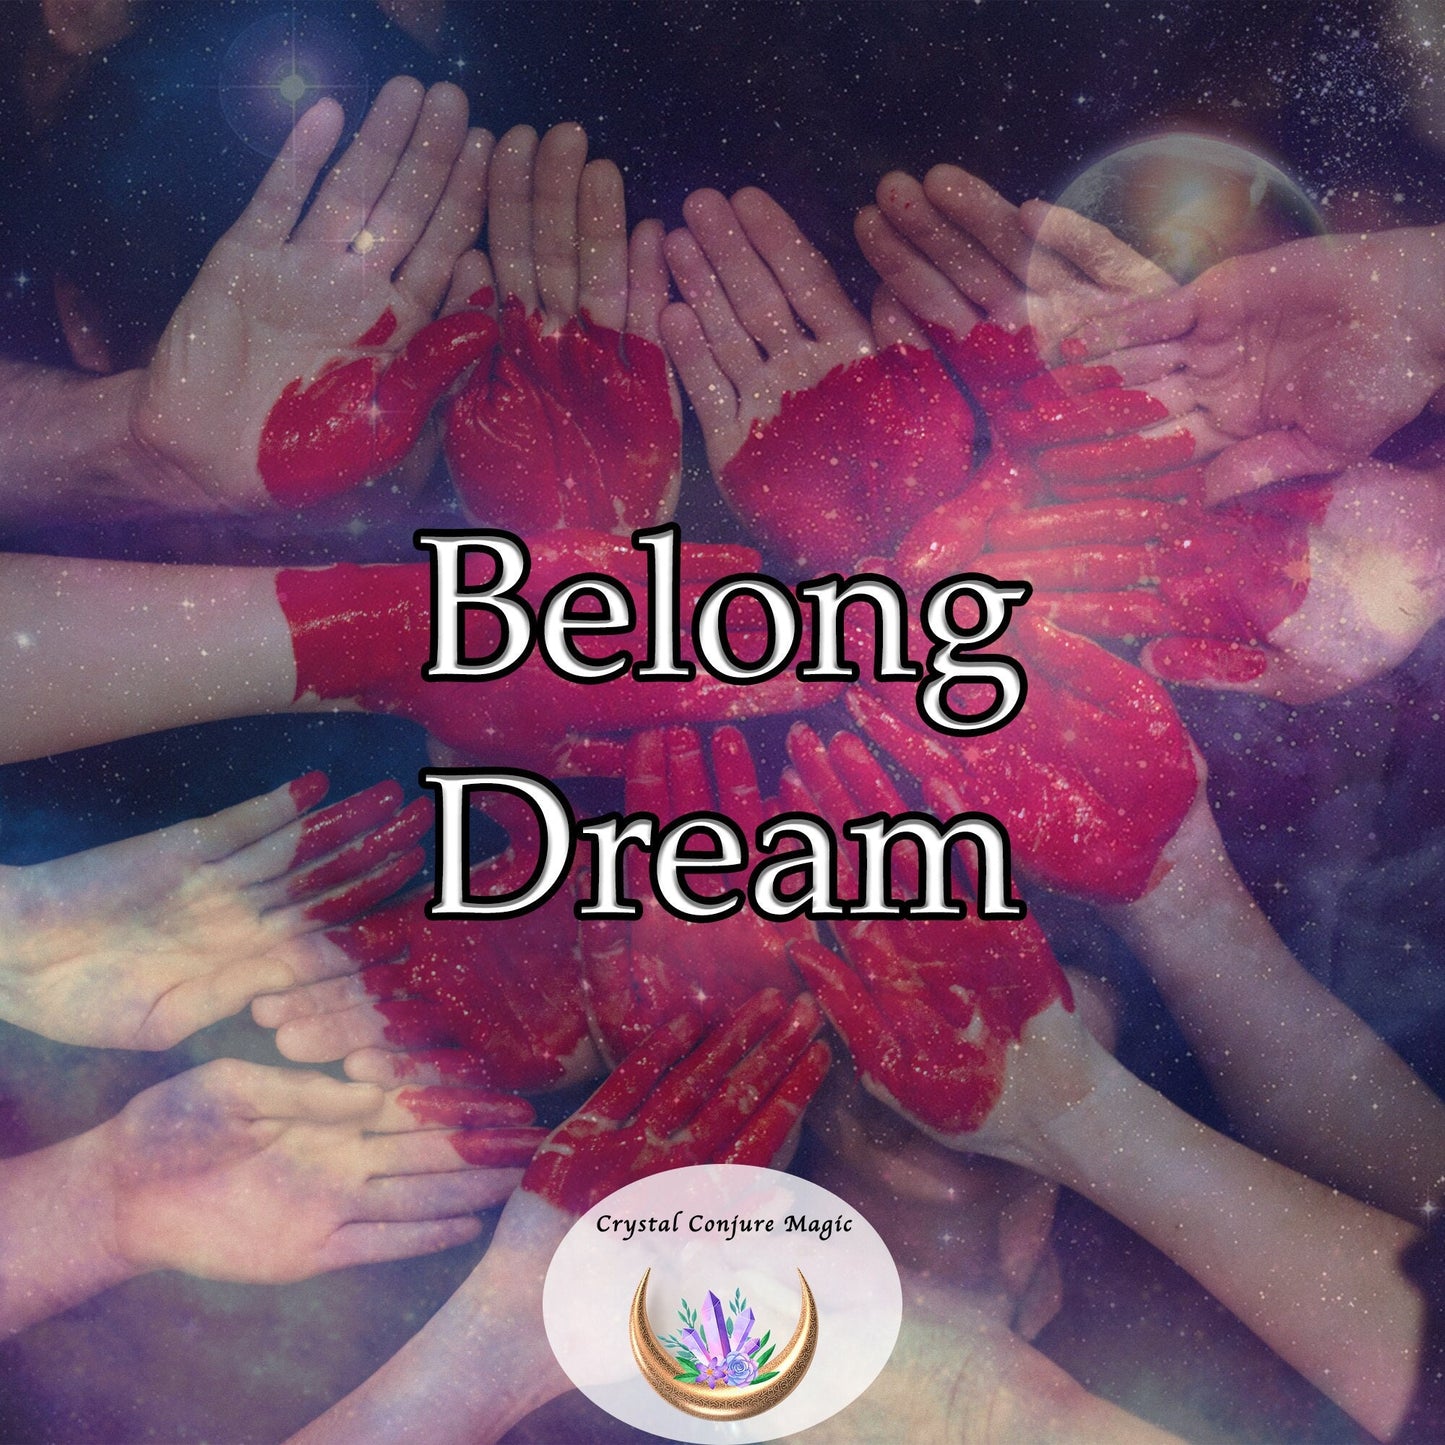 Belong Dream - now harness your dreaming mind to fit in and be welcomed and feel at home again with friends and family and co workers